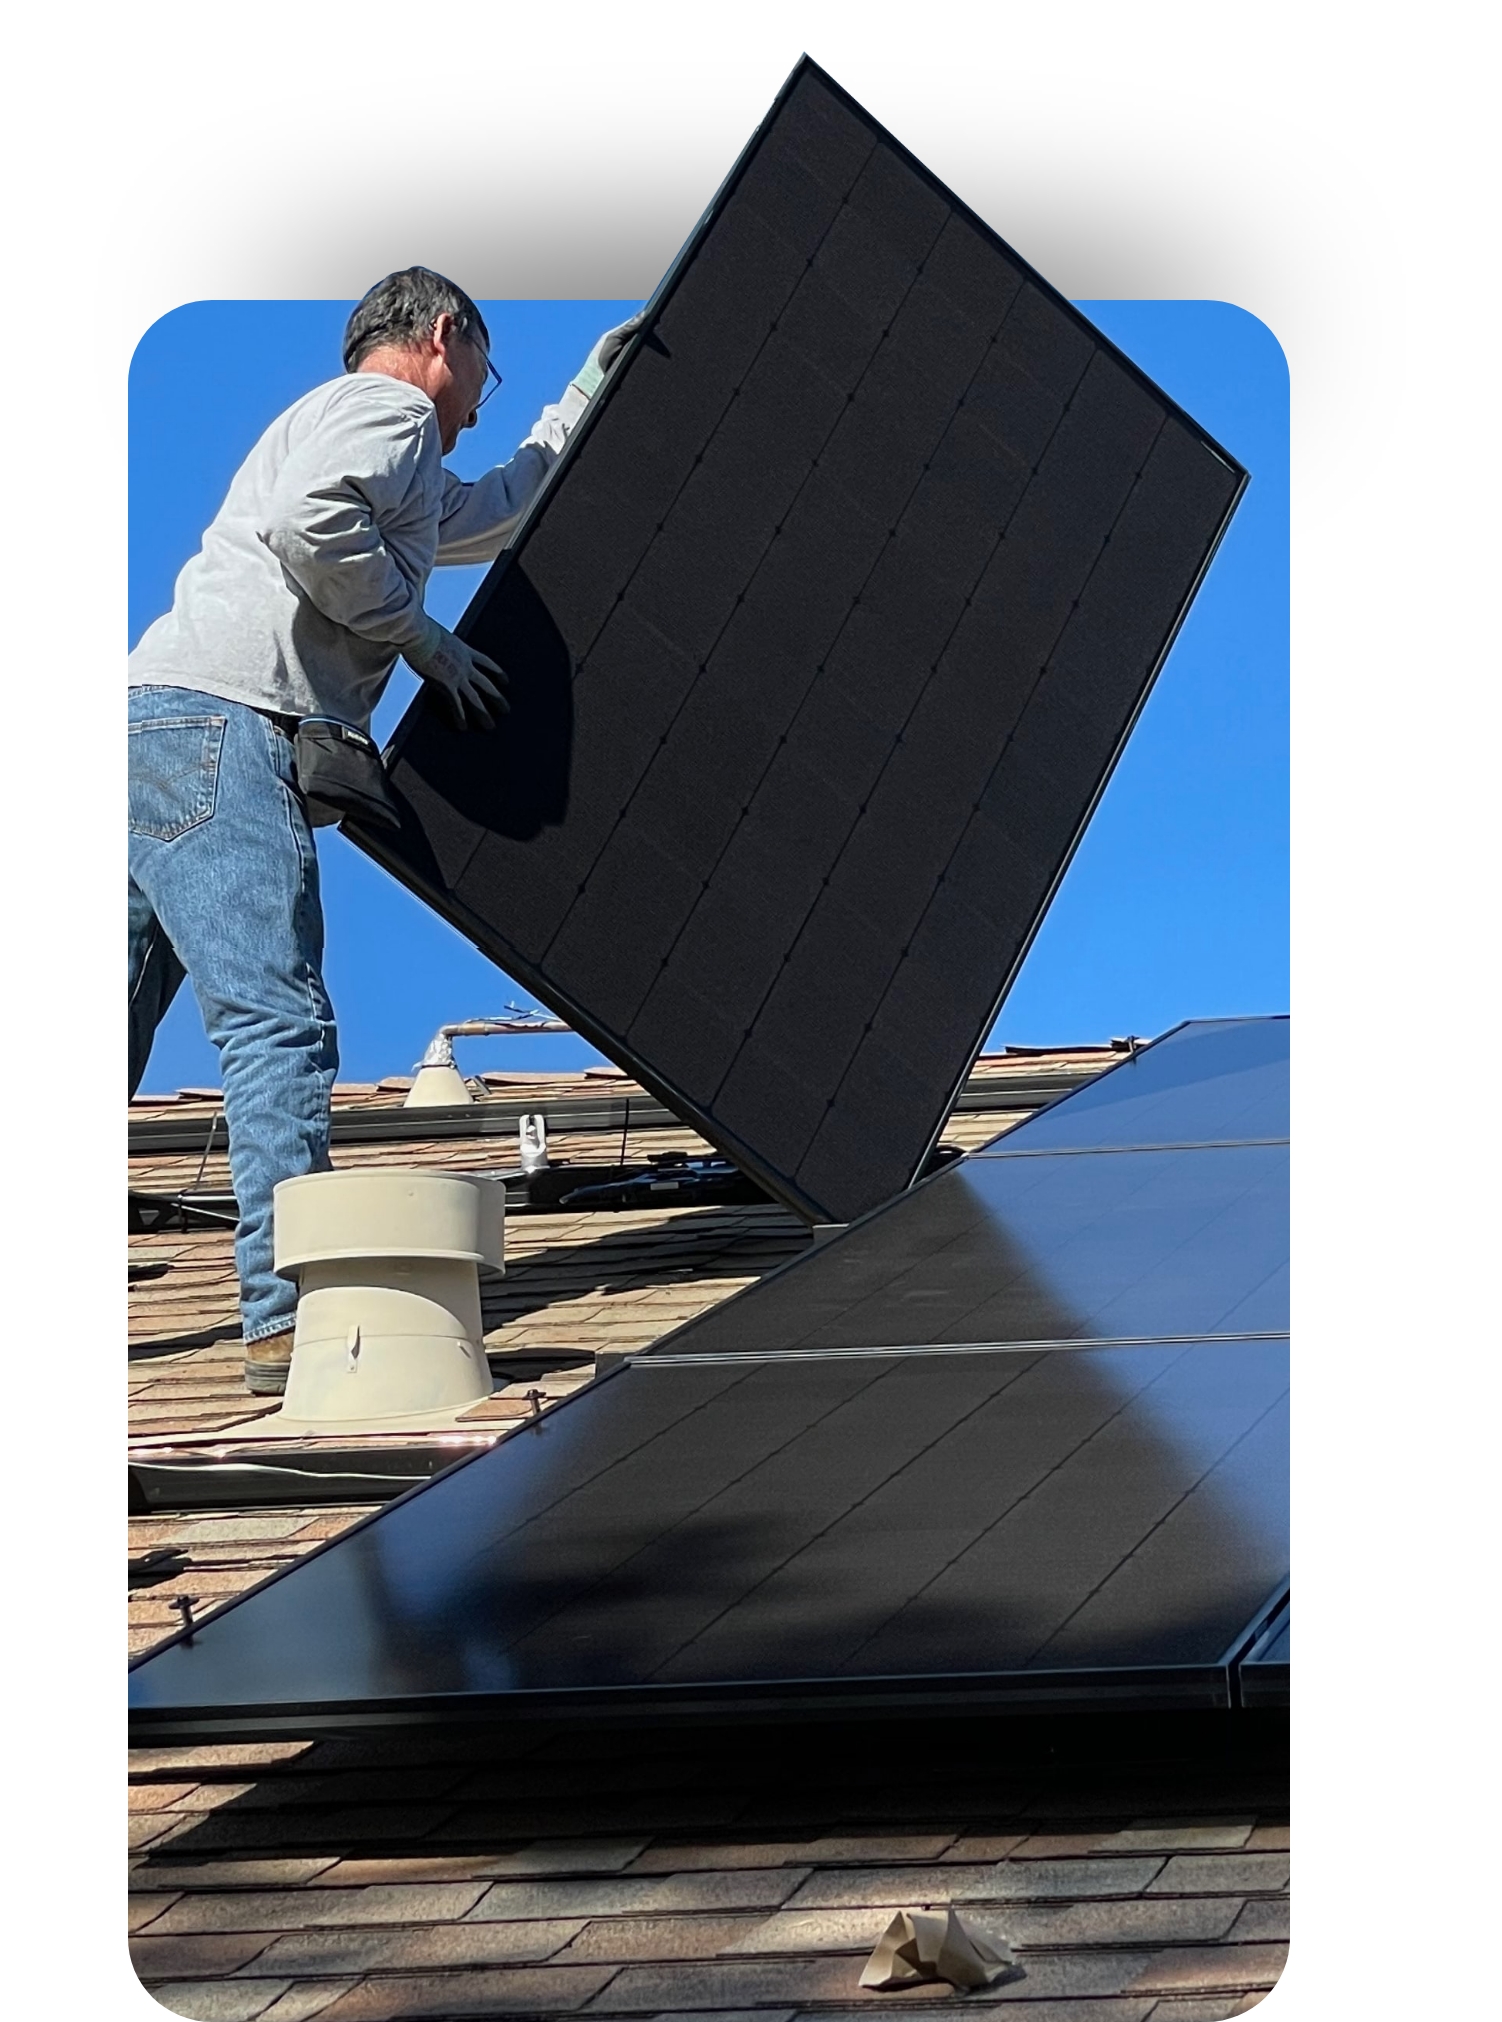 Solar by Peak to Peak is a local solar company specializing in solar energy systems for Castle Rock homeowners.